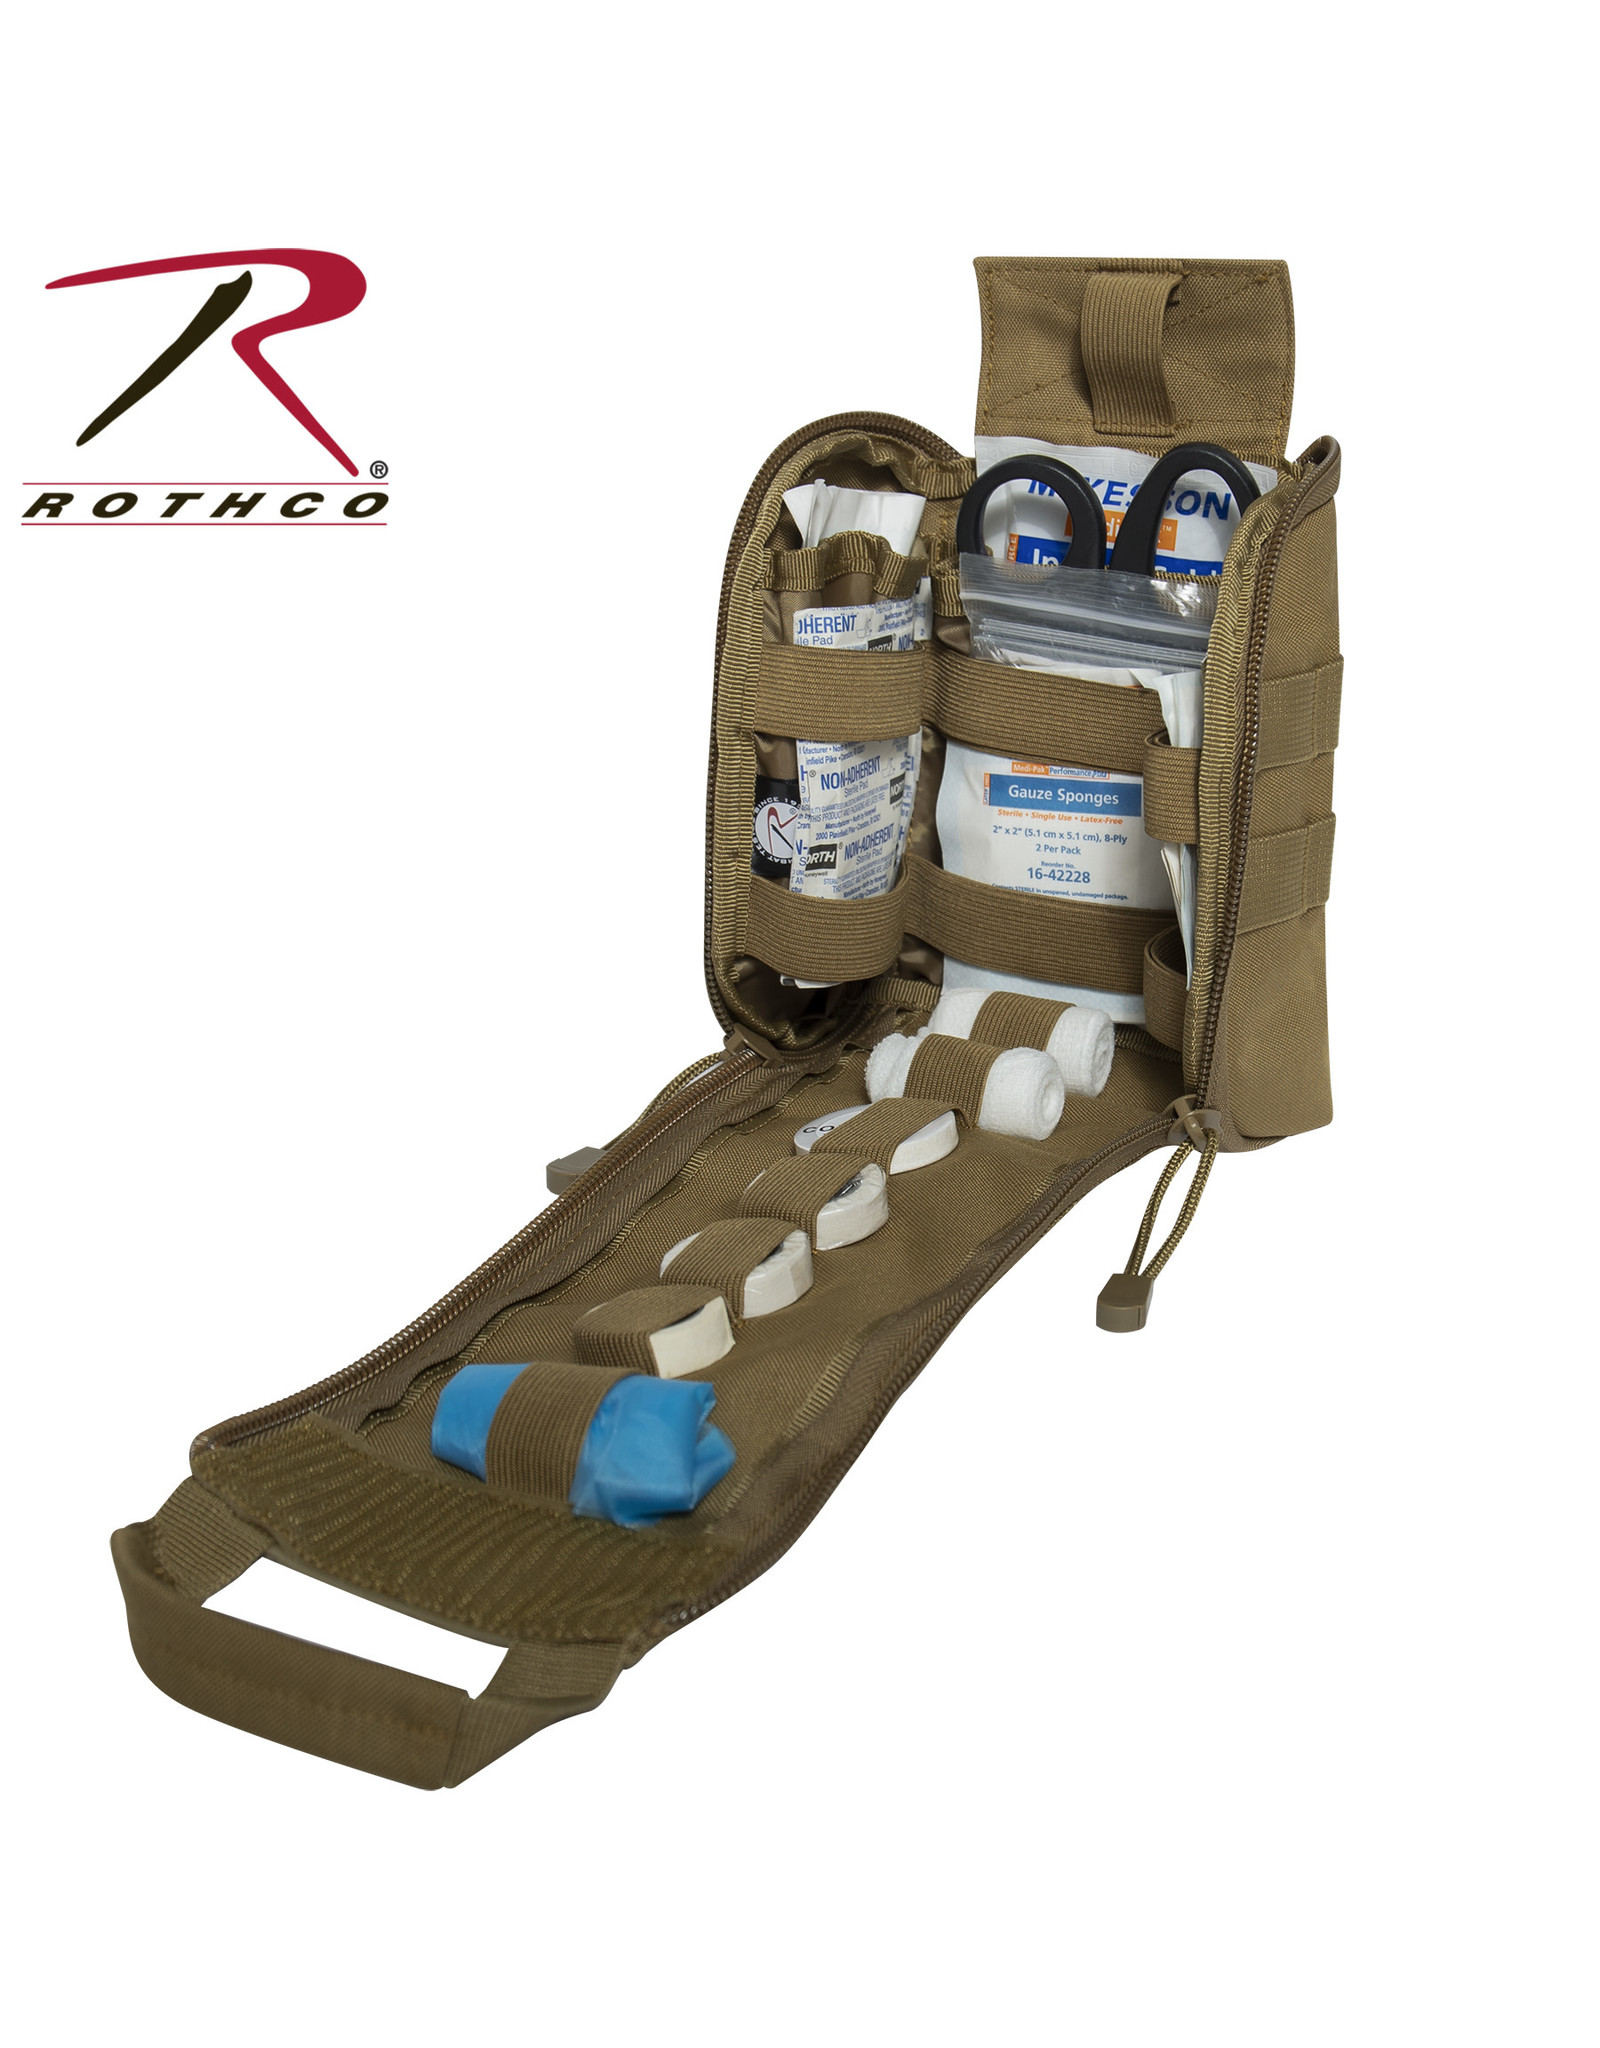 Rothco Rothco Fast Action Molle Medical Pouch